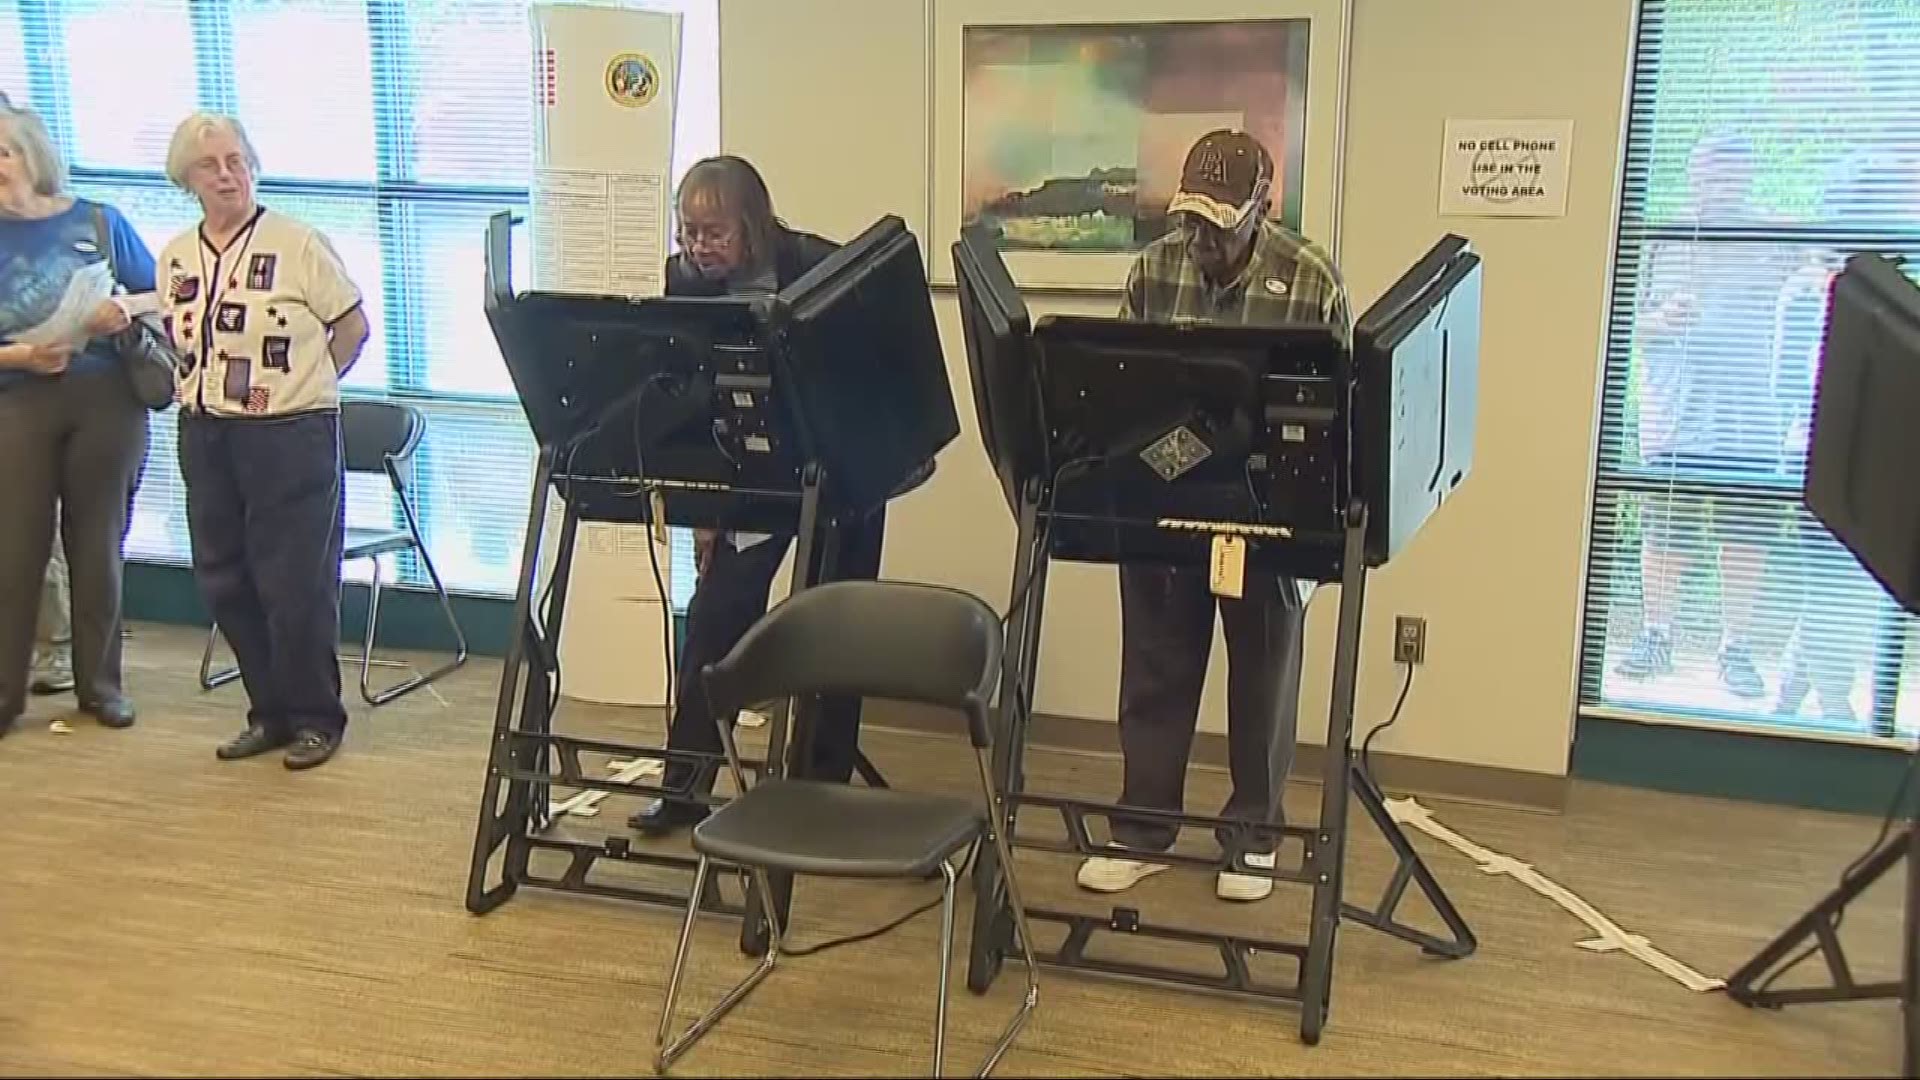 Wednesday is the first day of early voting in North Carolina as residents can cast their votes for the upcoming midterm election. Nearly two dozen locations will open for early voting in Mecklenburg County.